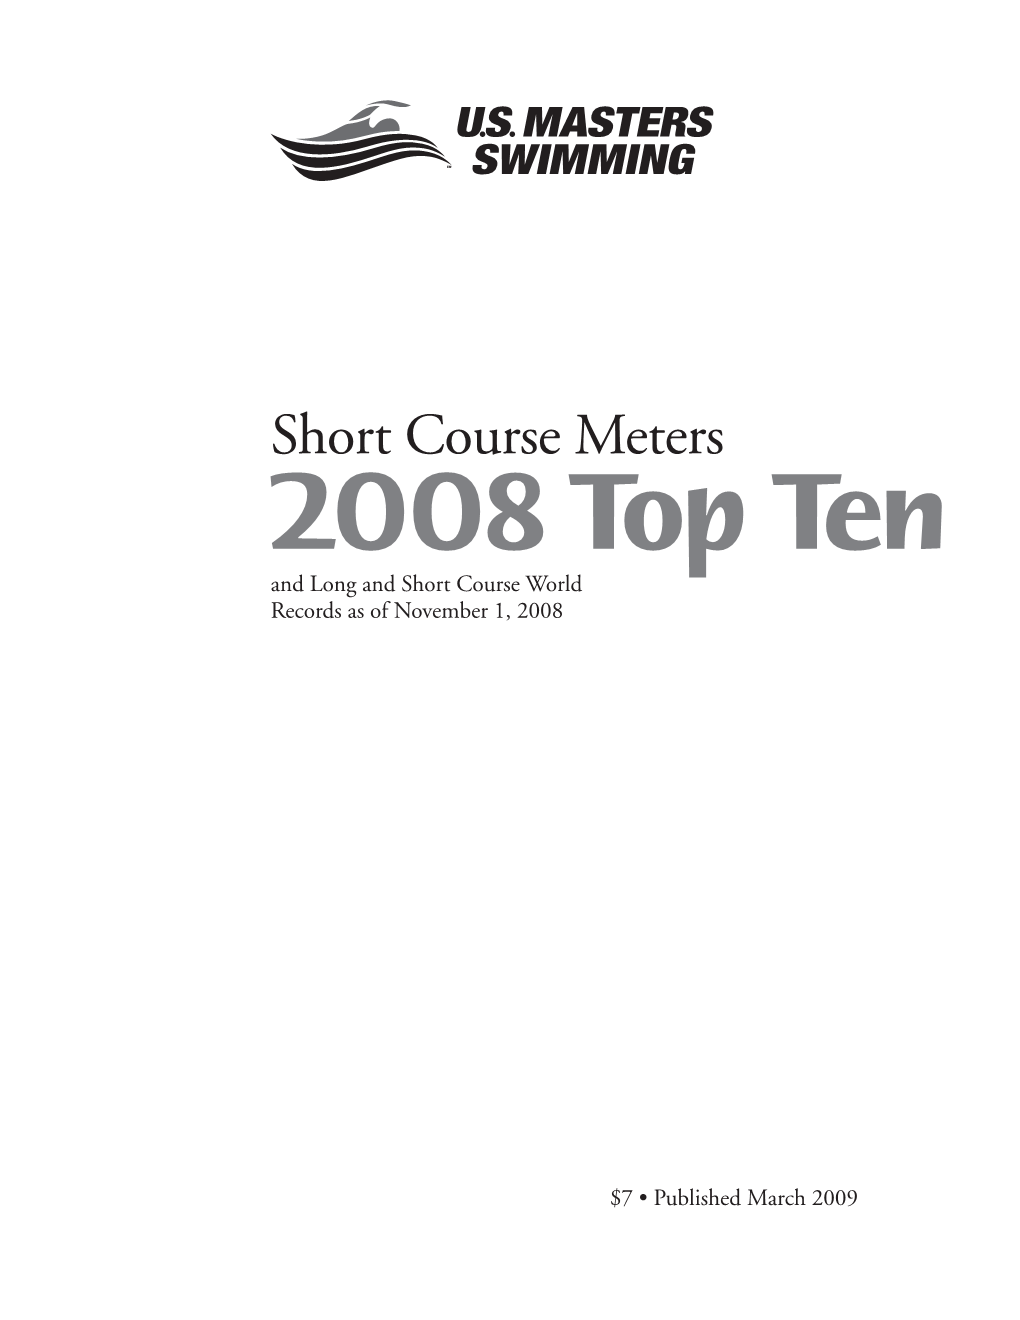 Short Course Meters 2008 Top Ten and Long and Short Course World Records As of November 1, 2008